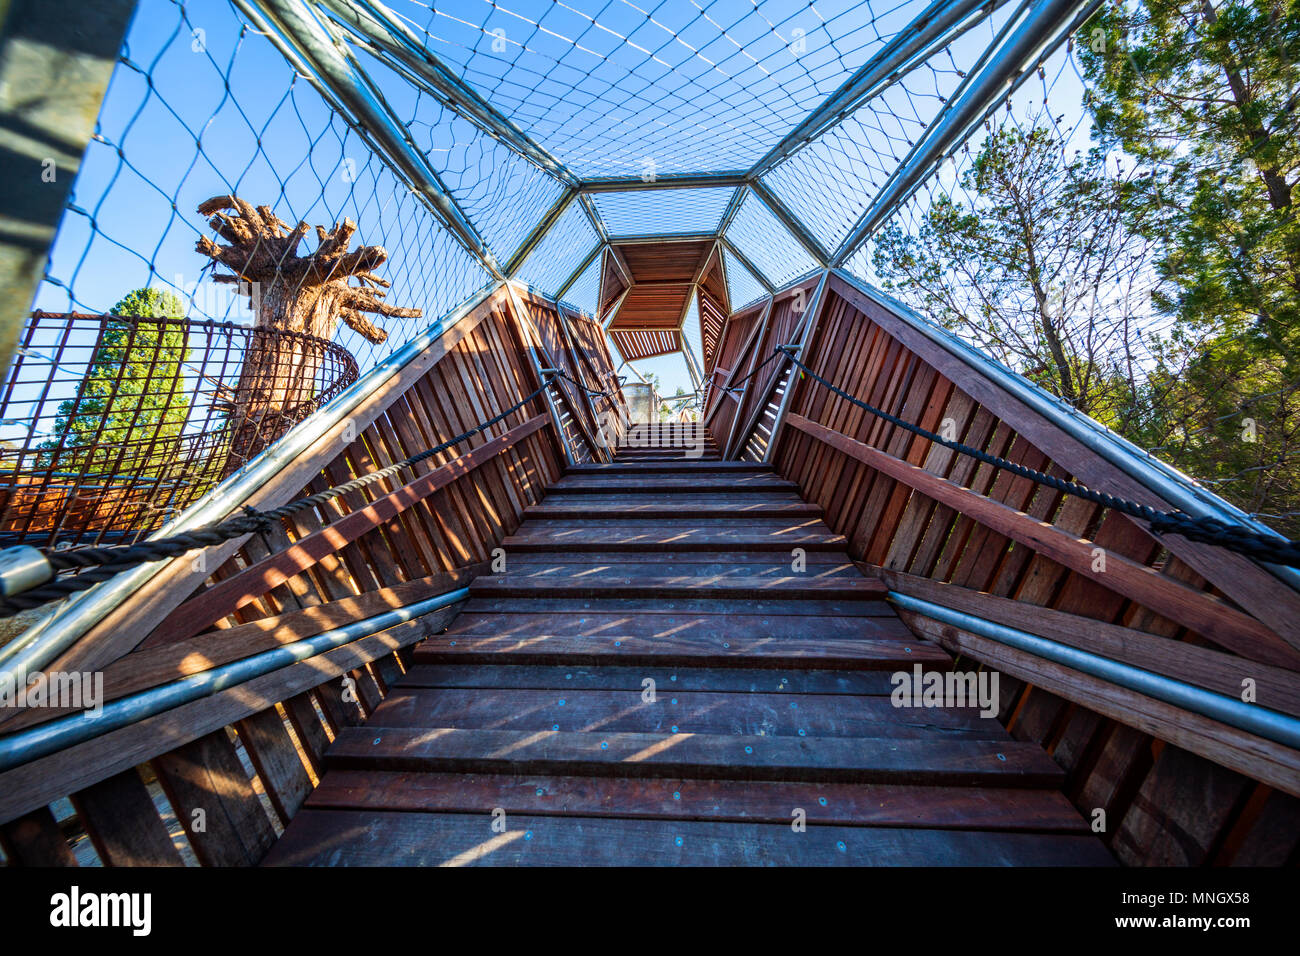 The Bungarra aerial walkway (made from recycled timber) at Rio Tinto Naturescape in Kings Park, Perth, Western Australia. Stock Photo